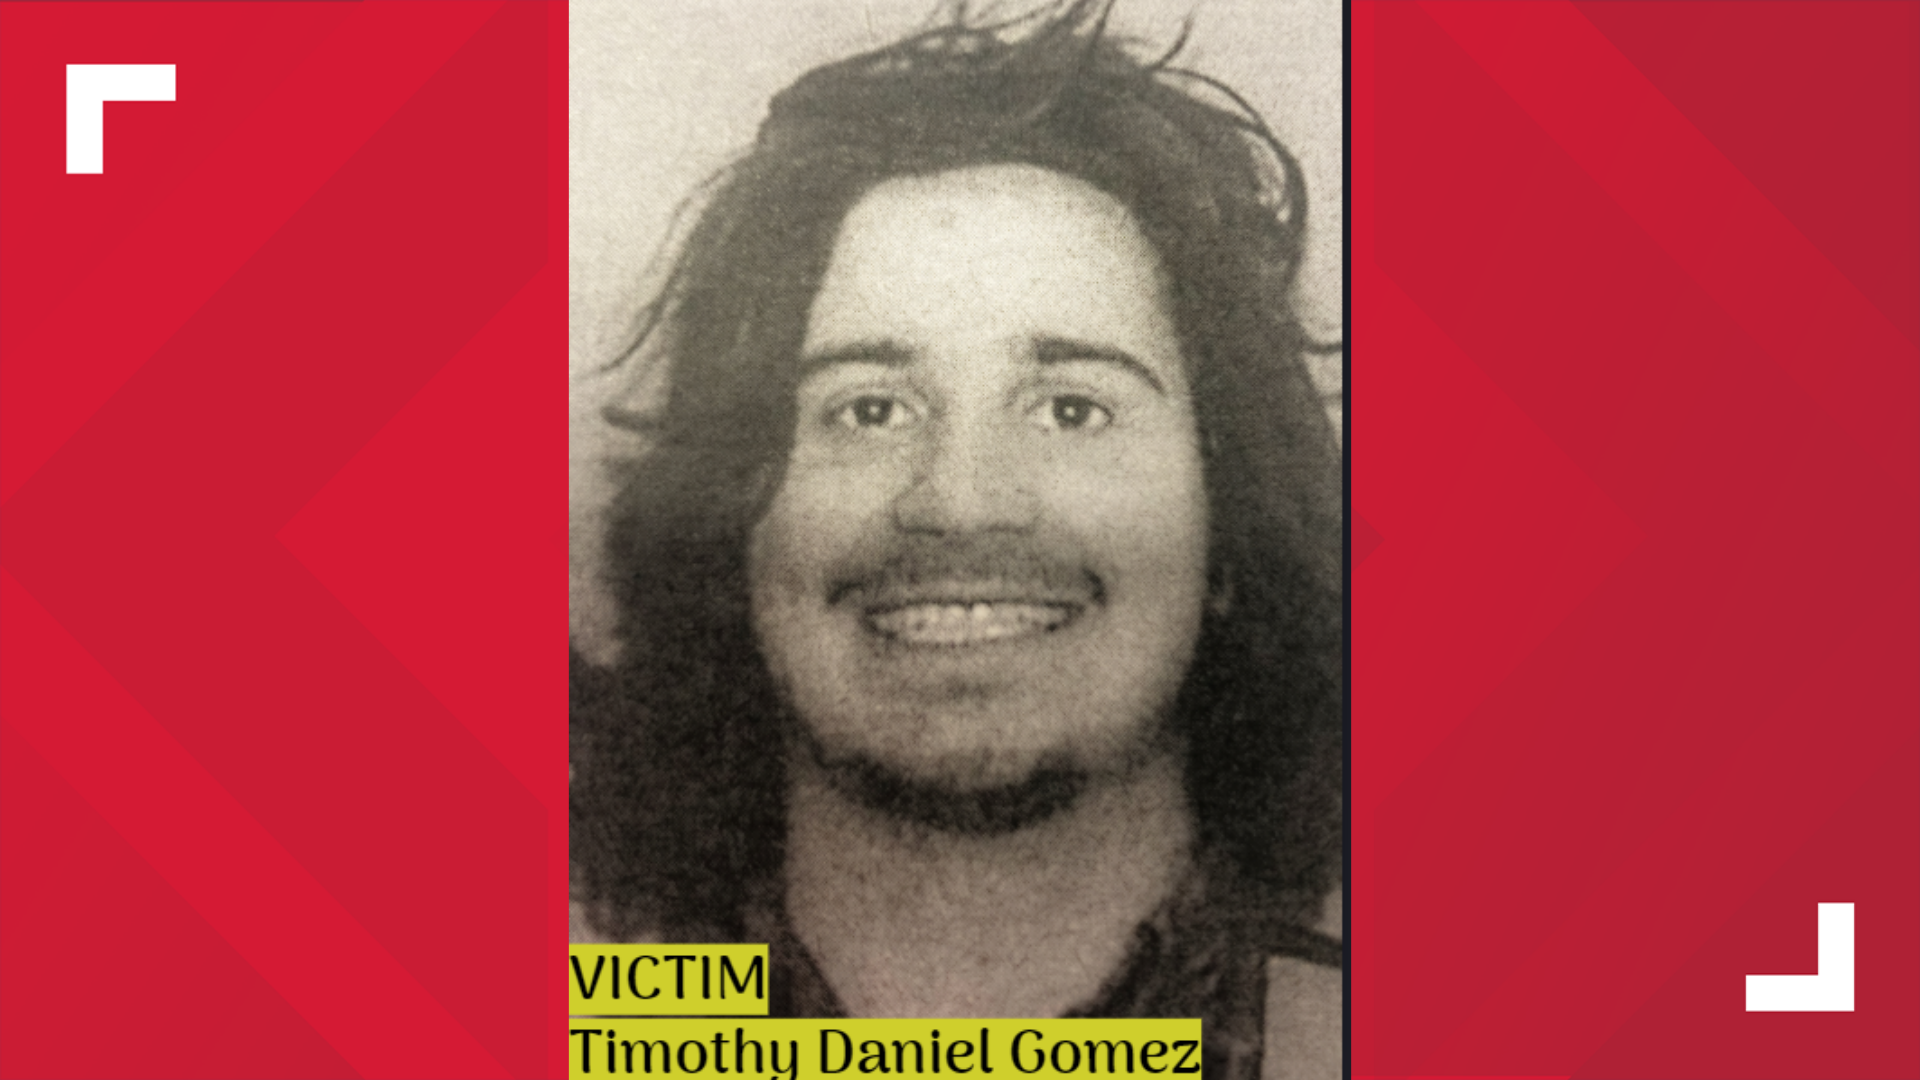 DNA analysis confirmed the remains belonged to Timothy Daniel Gomez. Now investigators are asking for help in the case.